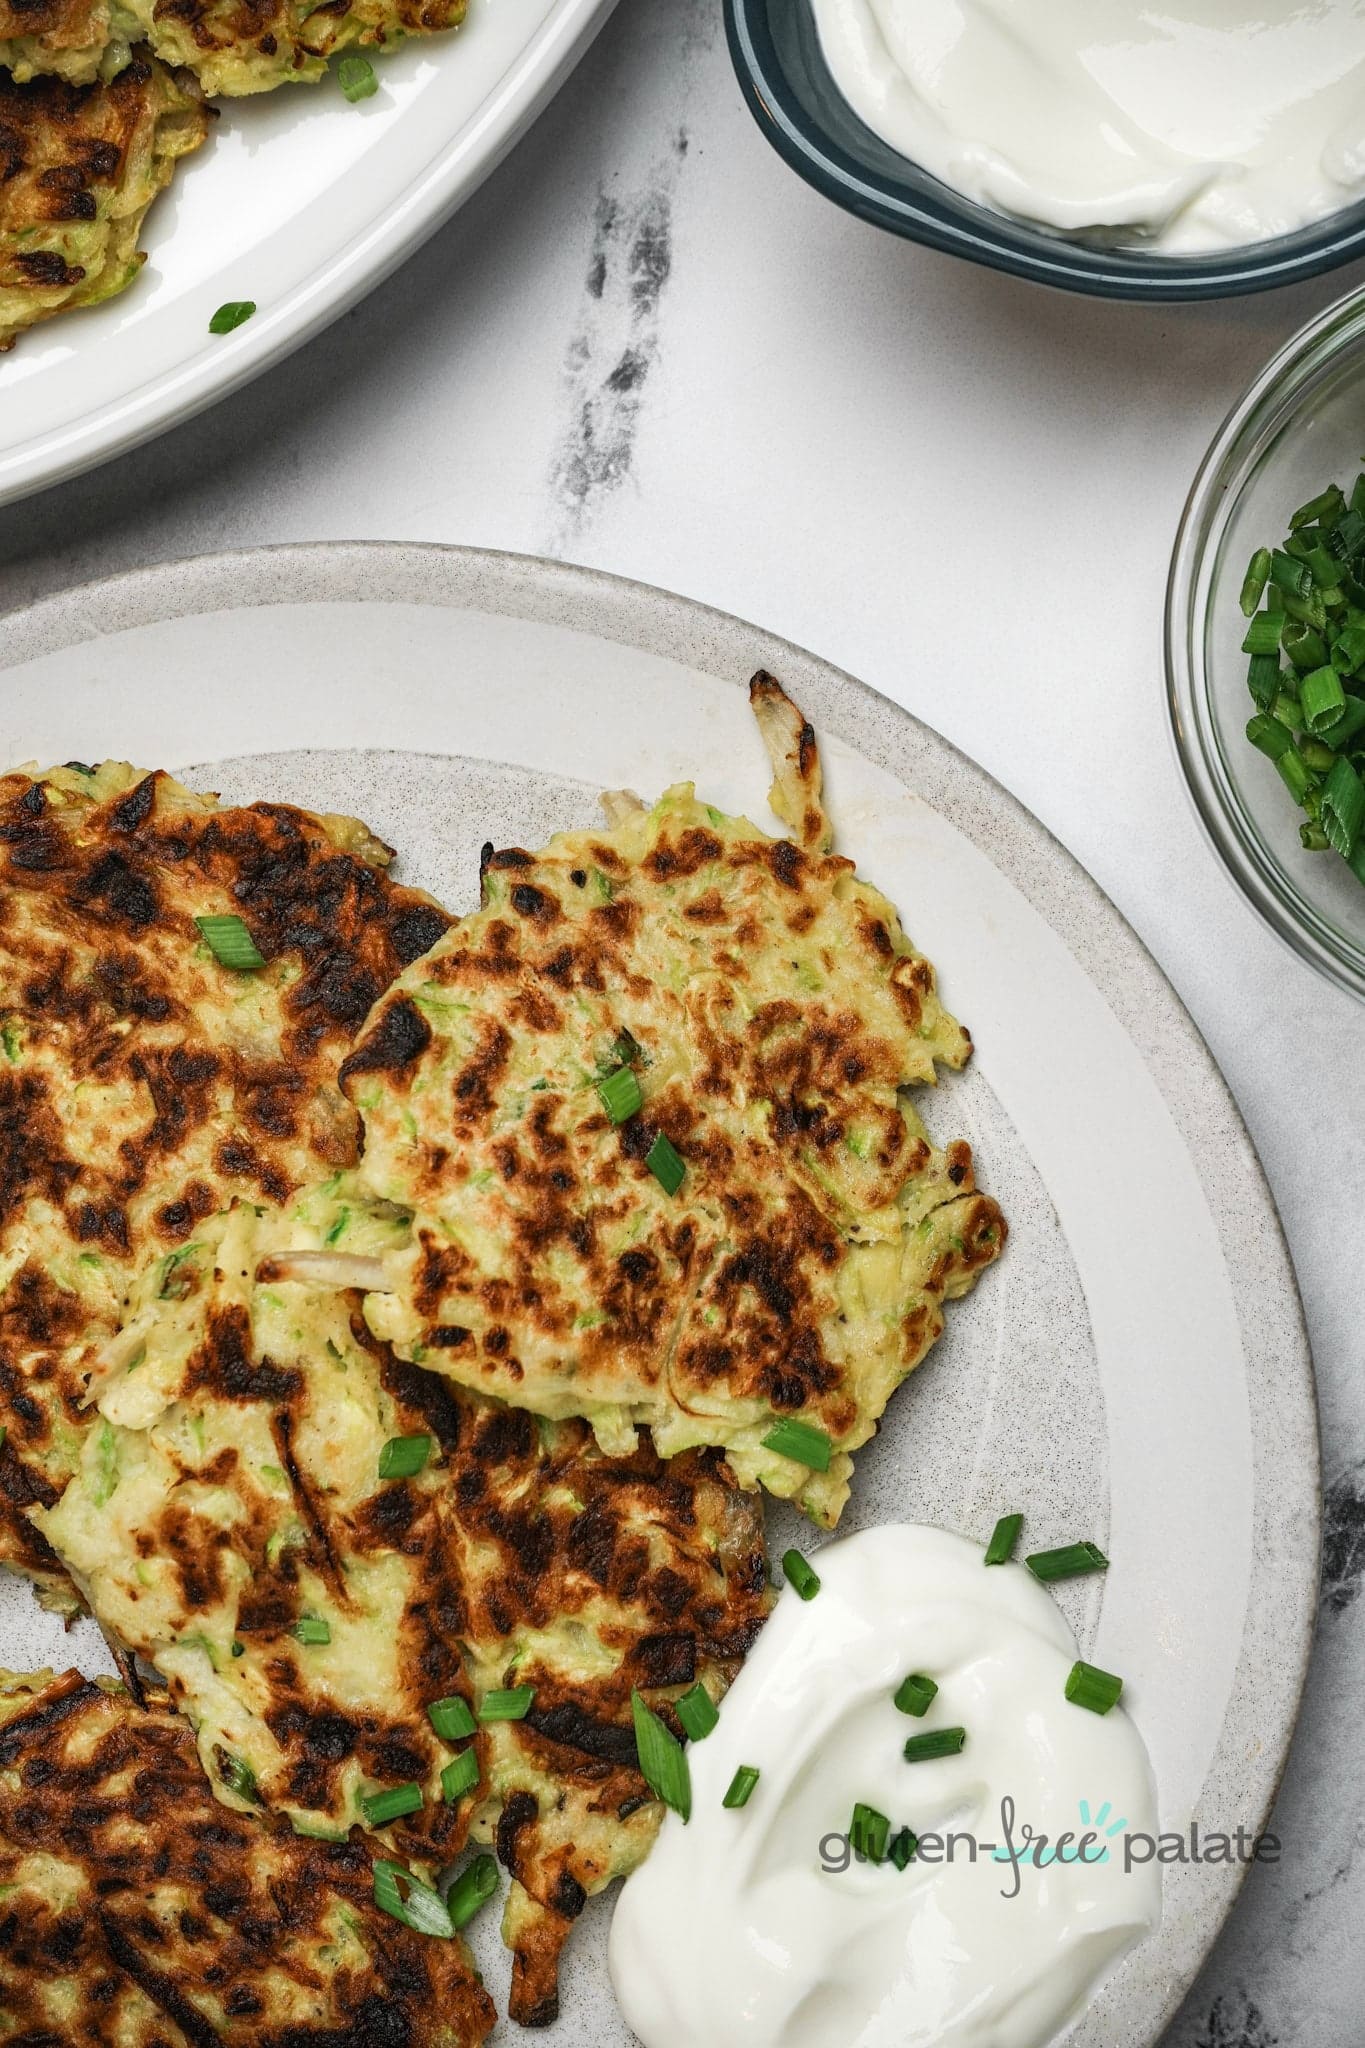 Gluten-free zucchini fritters on a white plate.